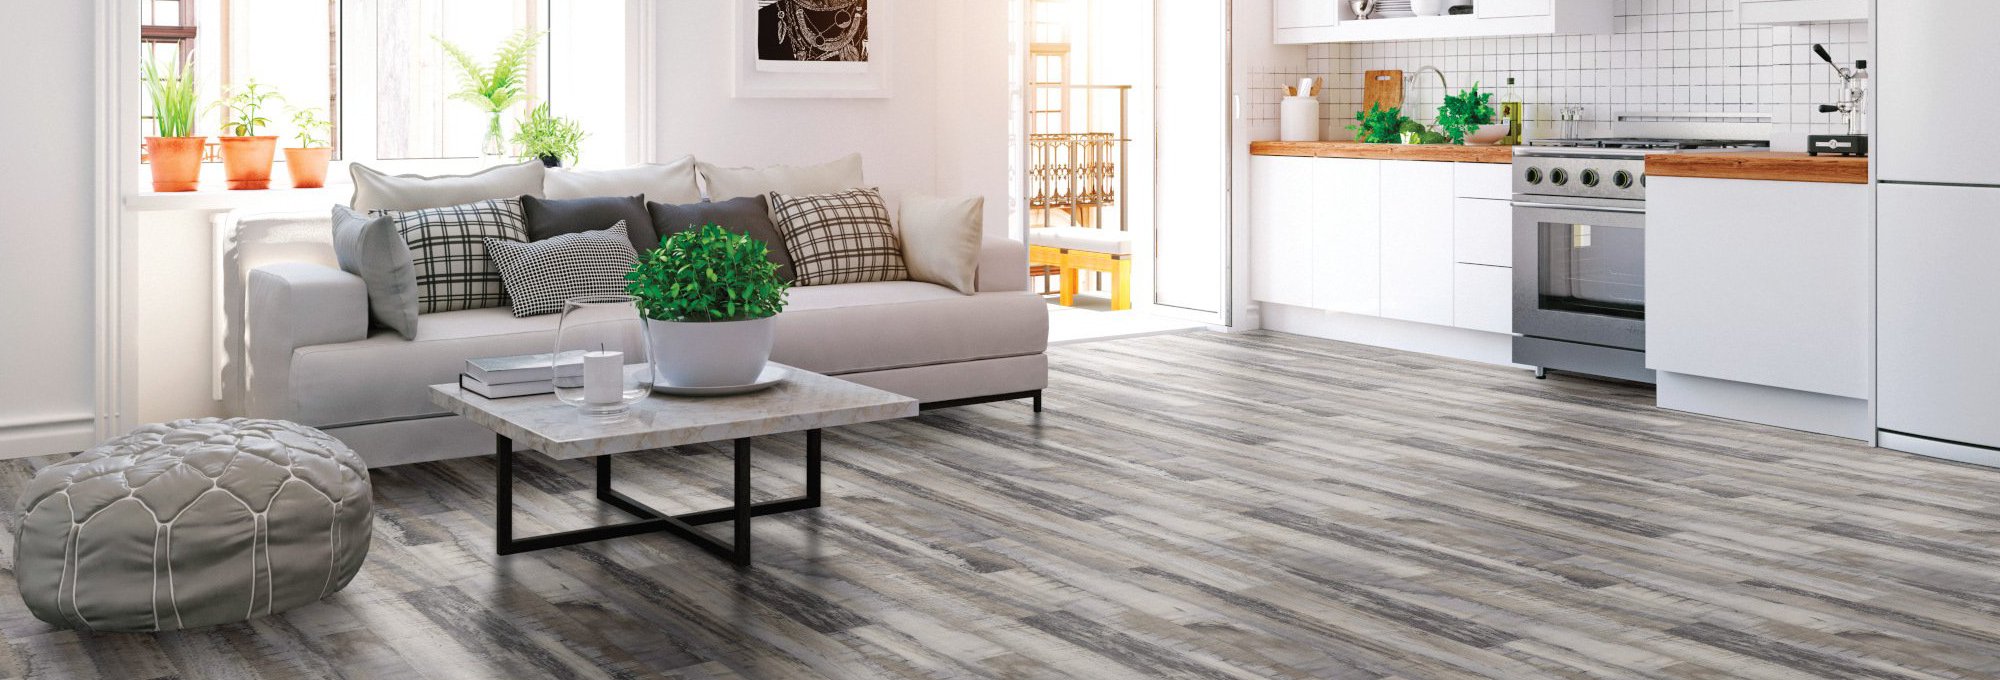 Flooring experts here to help you with your next flooring project - The Carpet Store in Sylmar, CA